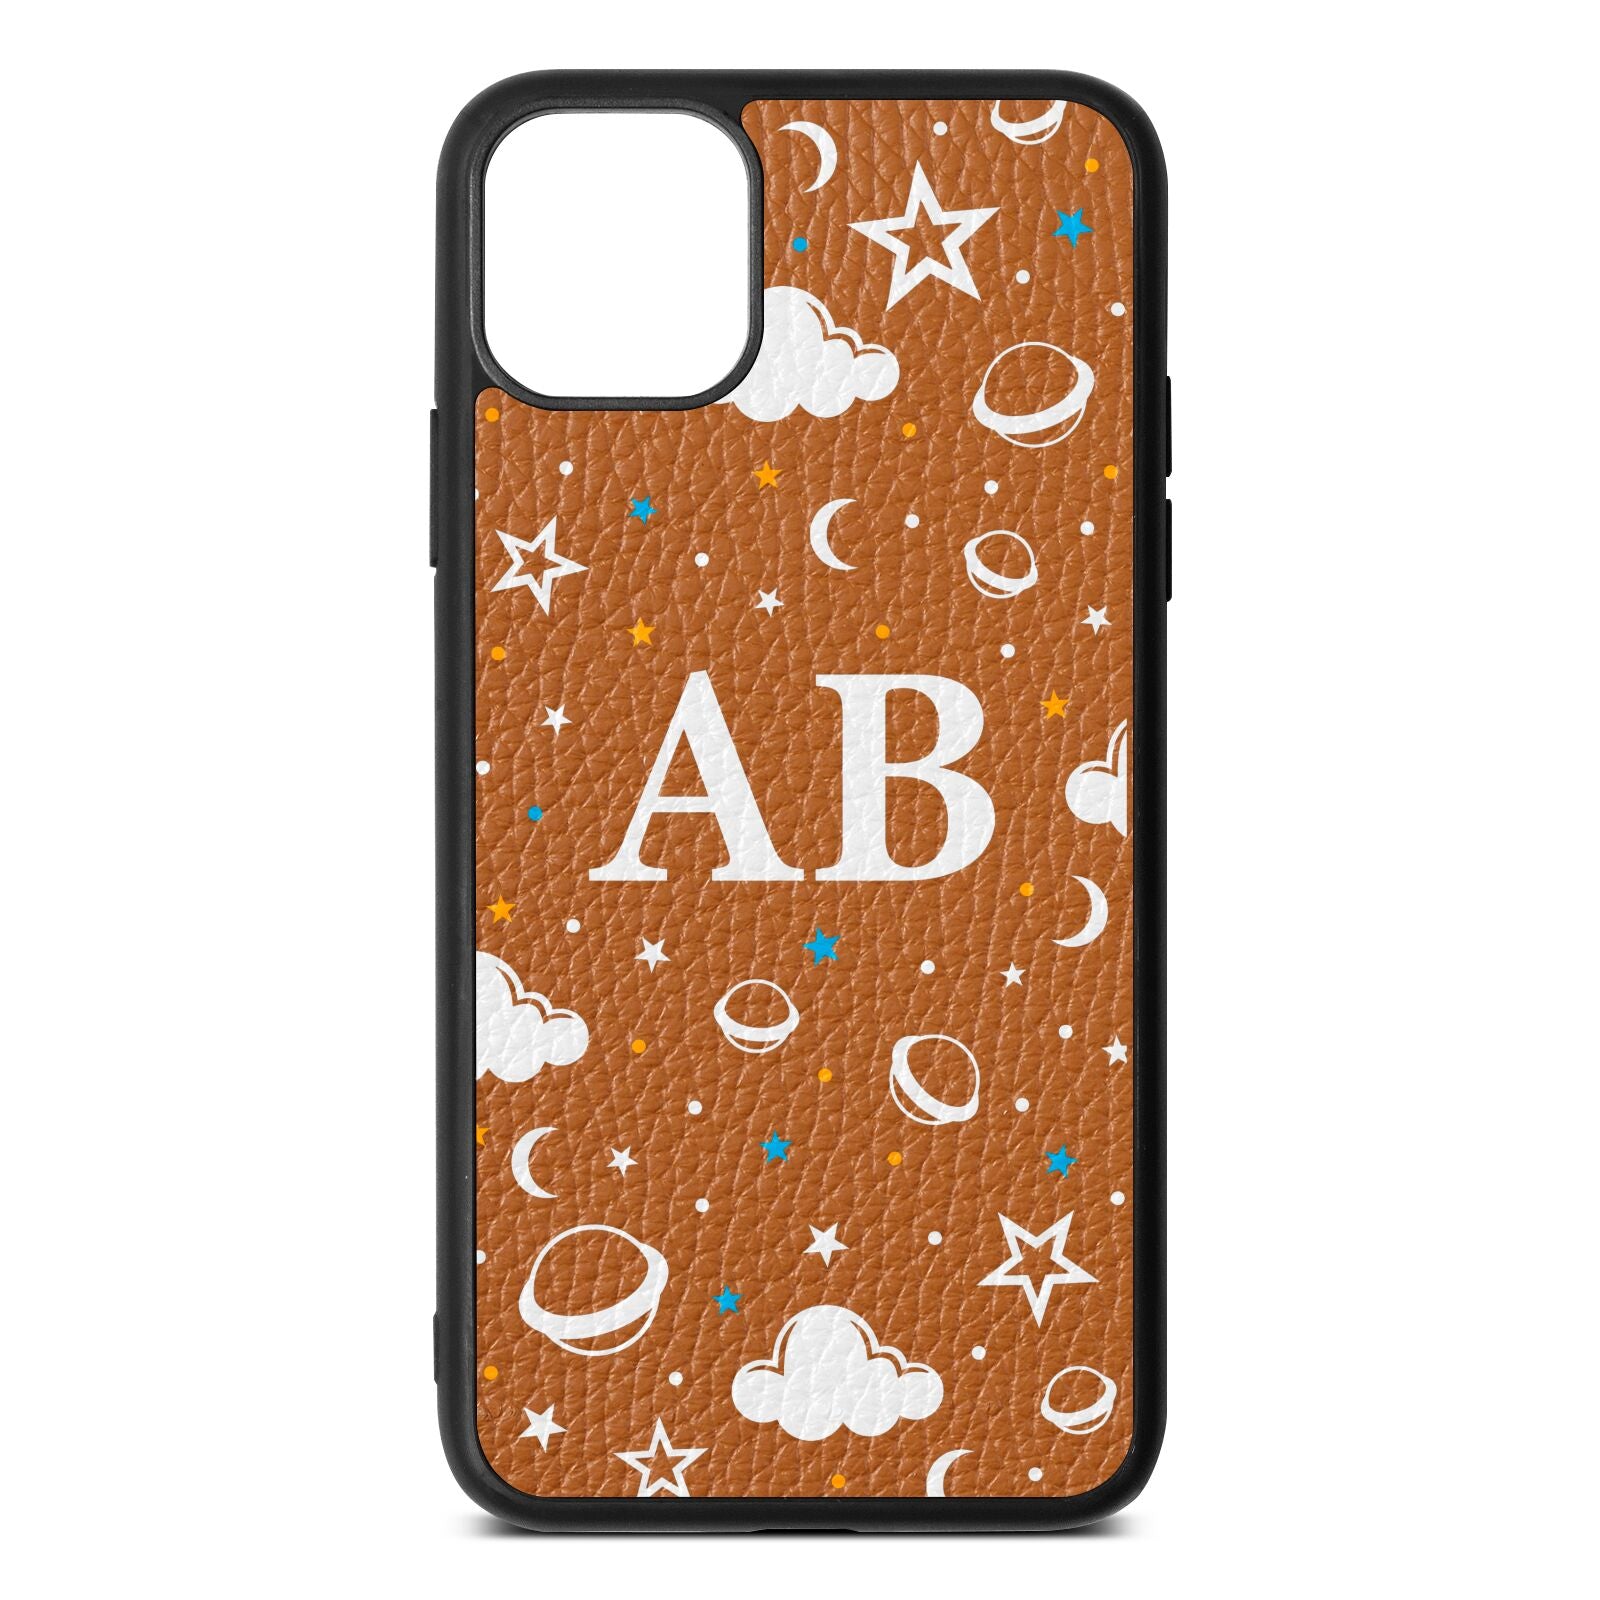 Astronomical Initials Tan Pebble Leather iPhone 11 Pro Max Case